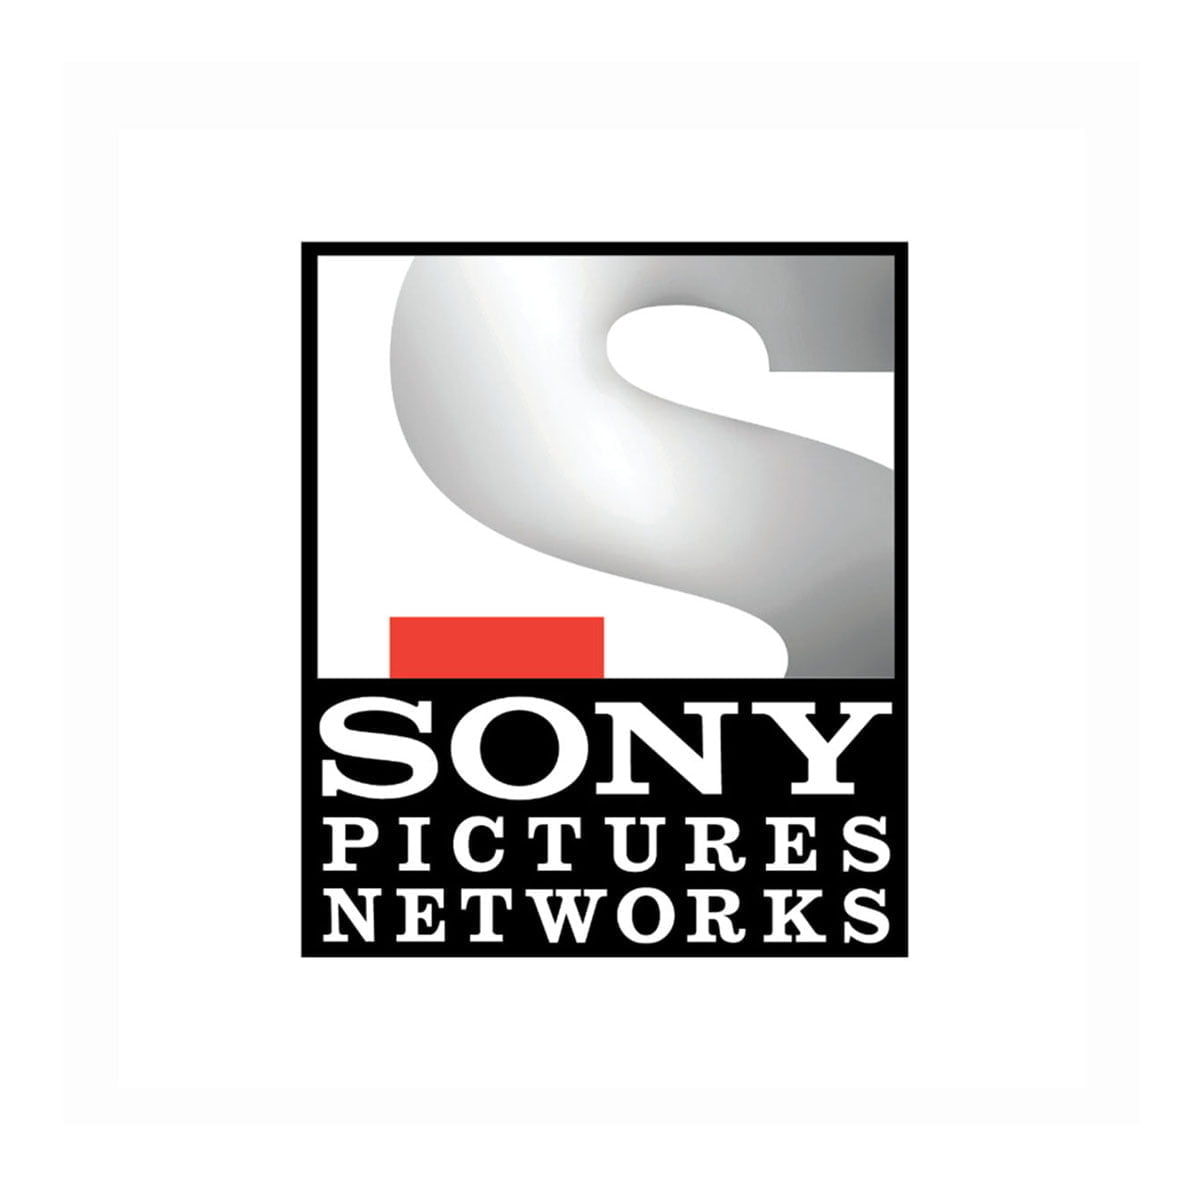 Sony Pictures Network to shutdown Ten Cricket internationally from 31 March